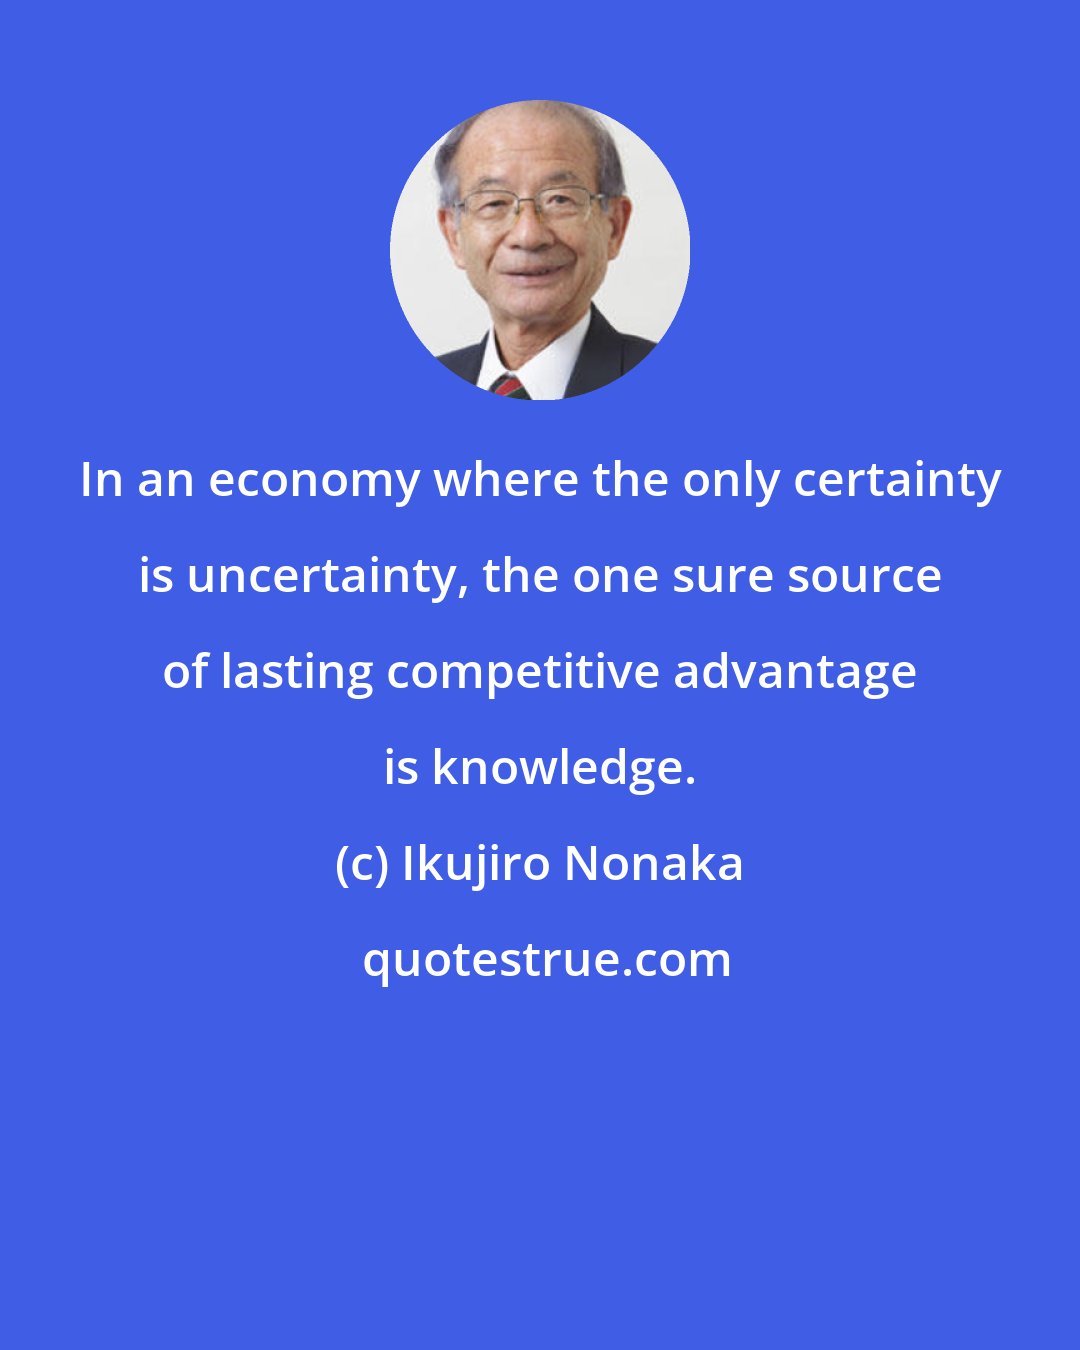 Ikujiro Nonaka: In an economy where the only certainty is uncertainty, the one sure source of lasting competitive advantage is knowledge.